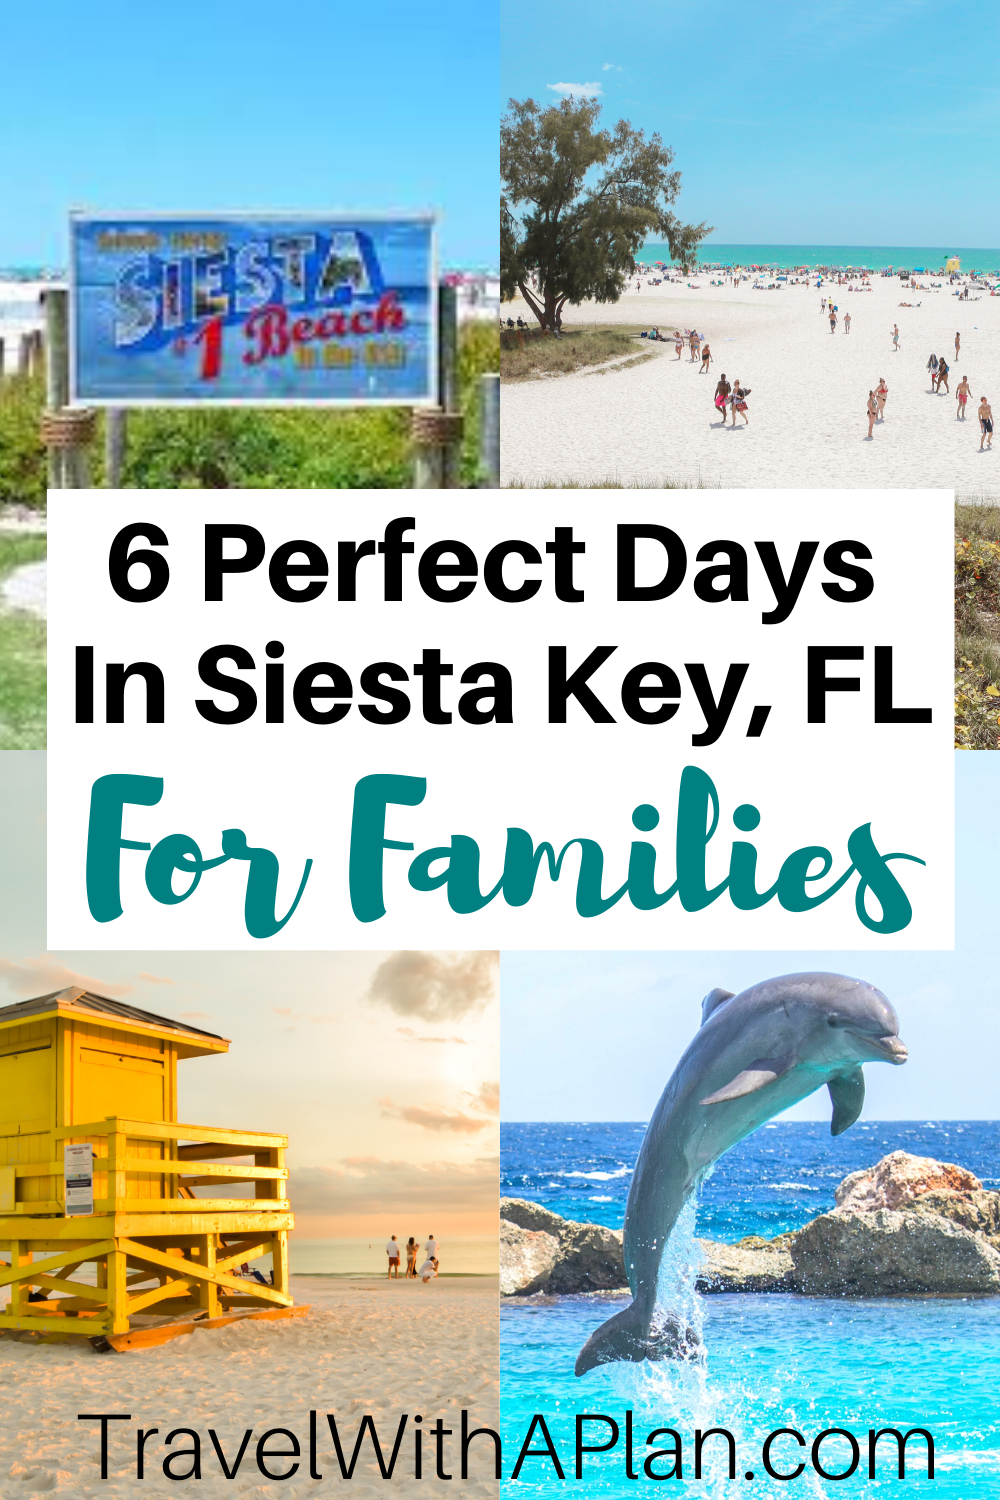 ead this article to get a detailed day-to-day itinerary for a Siesta Key family vacation!  Find out where to stay, where to eat, what to do, and how to get around during your Siesta Key getaway from top U.S. family travel blog, Travel With A Plan!  #floridatravel #whattodoinflorida #siestakeyfamilyvacation #siestakeybeachvacation #siestakeyfloridawithkids